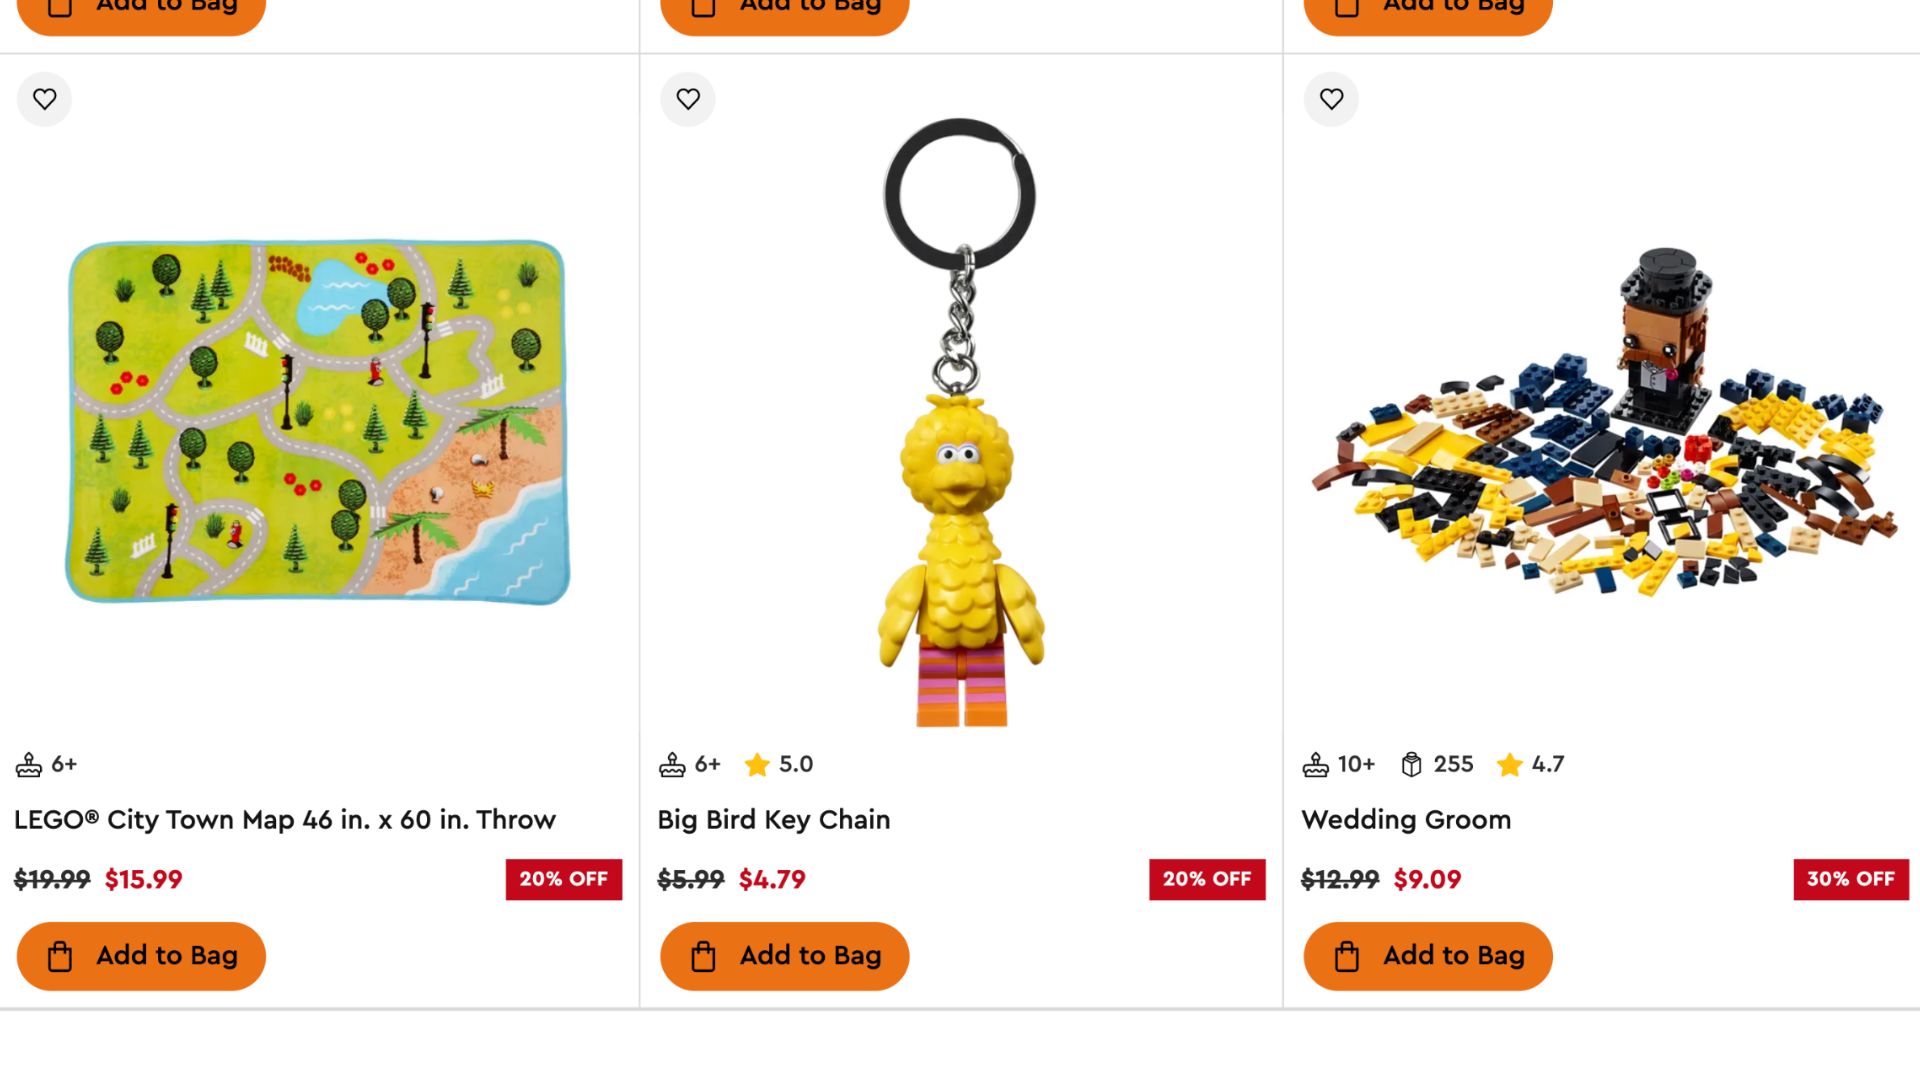 Charm Pricing being implemented on lego.com